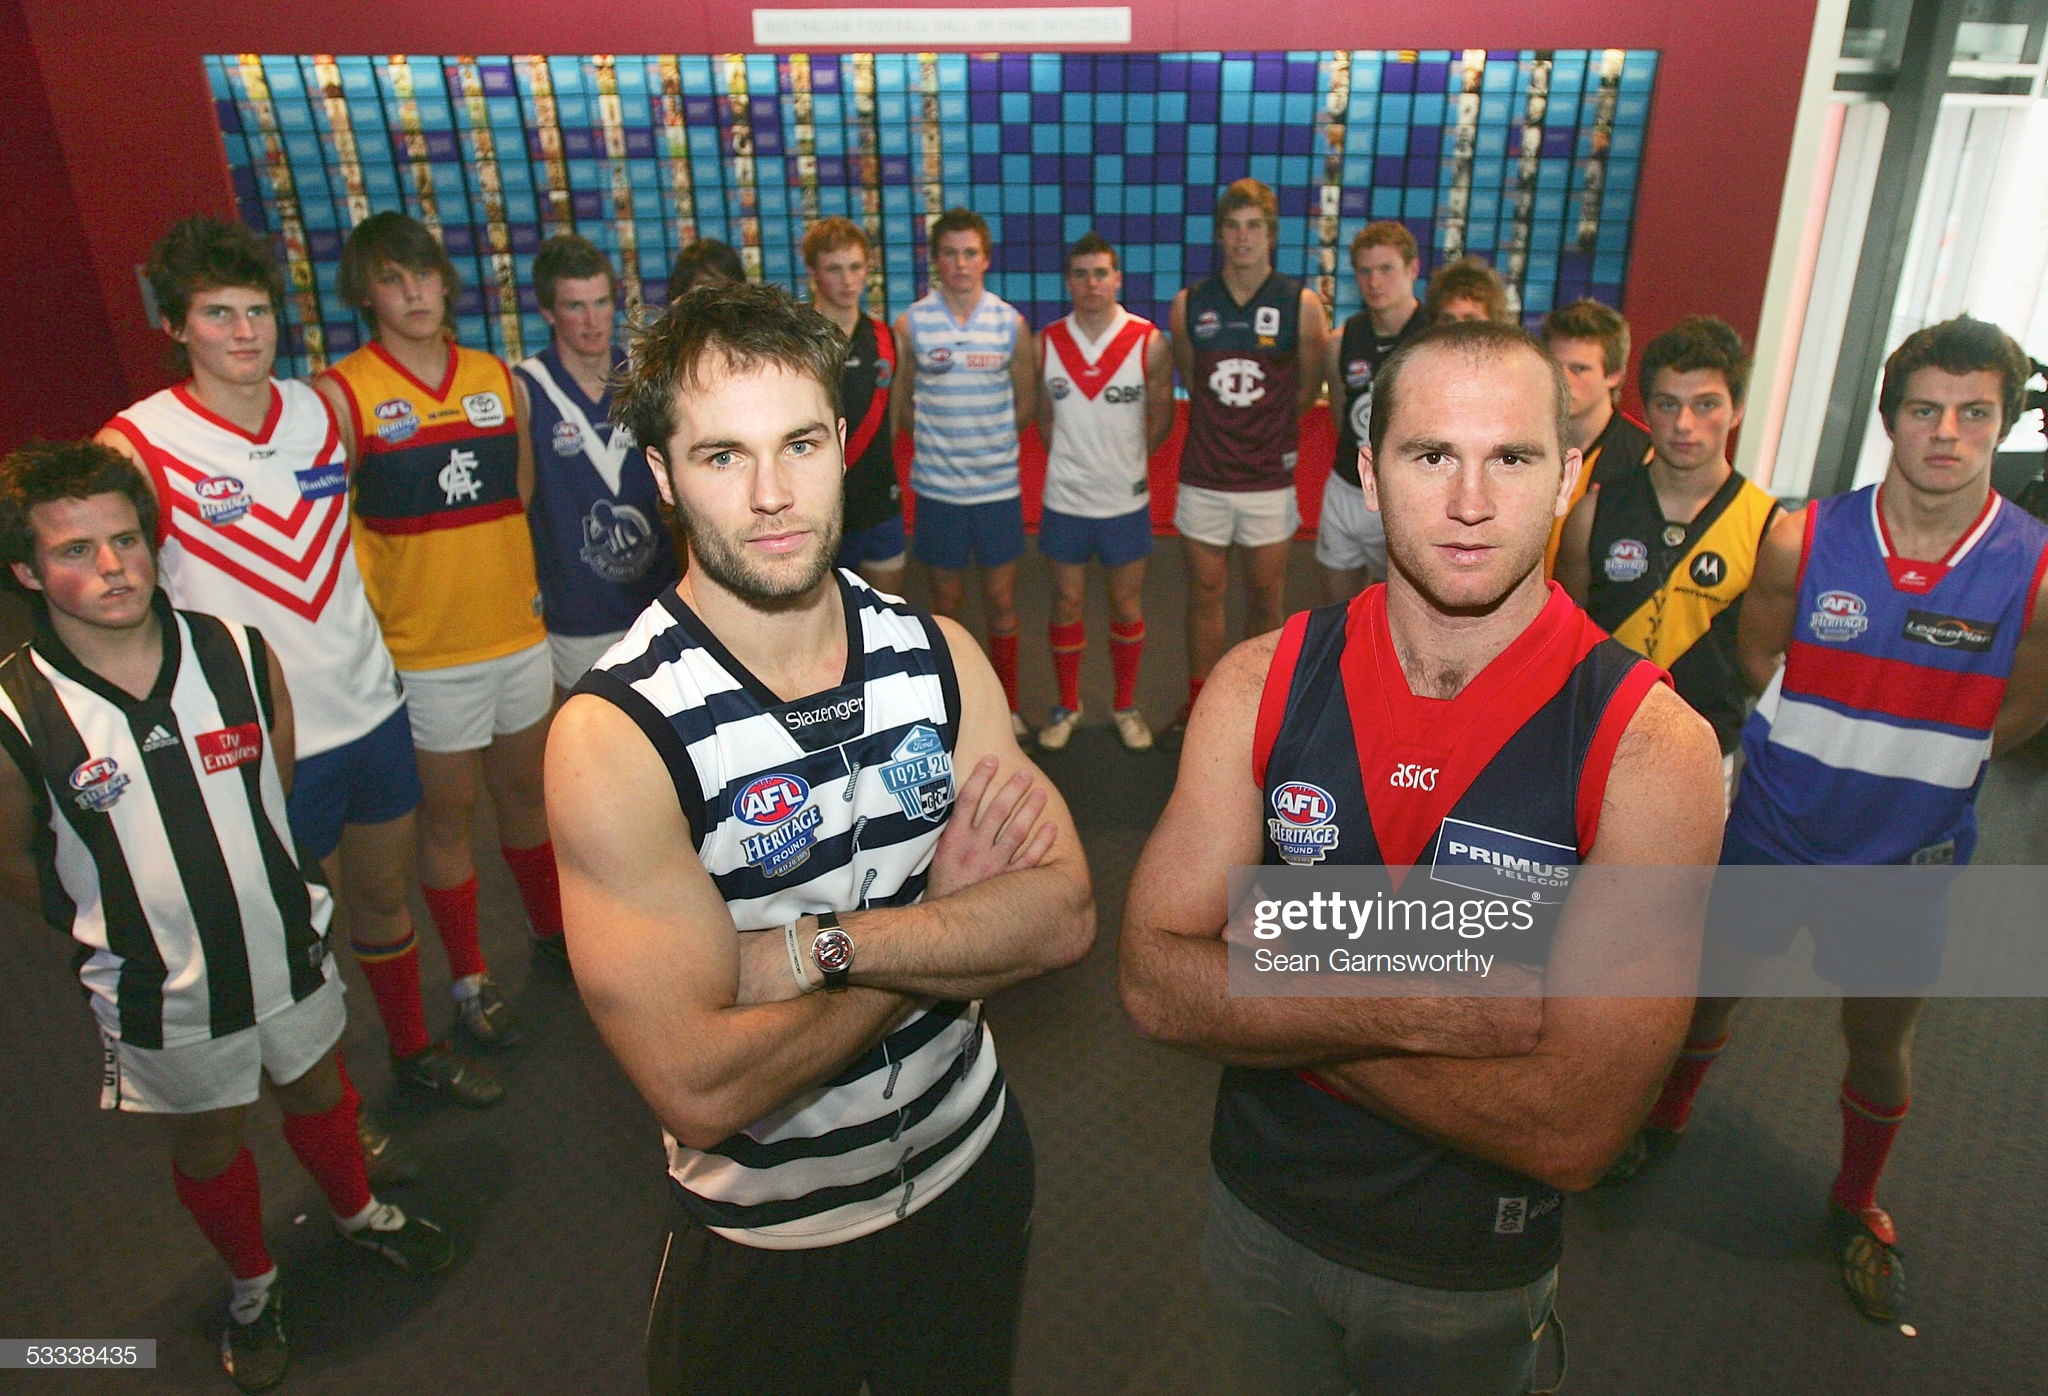 tom-harley-wearing-a-geelong-jumper-and-david-neitz-wearing-a-jumper-picture-id53338435